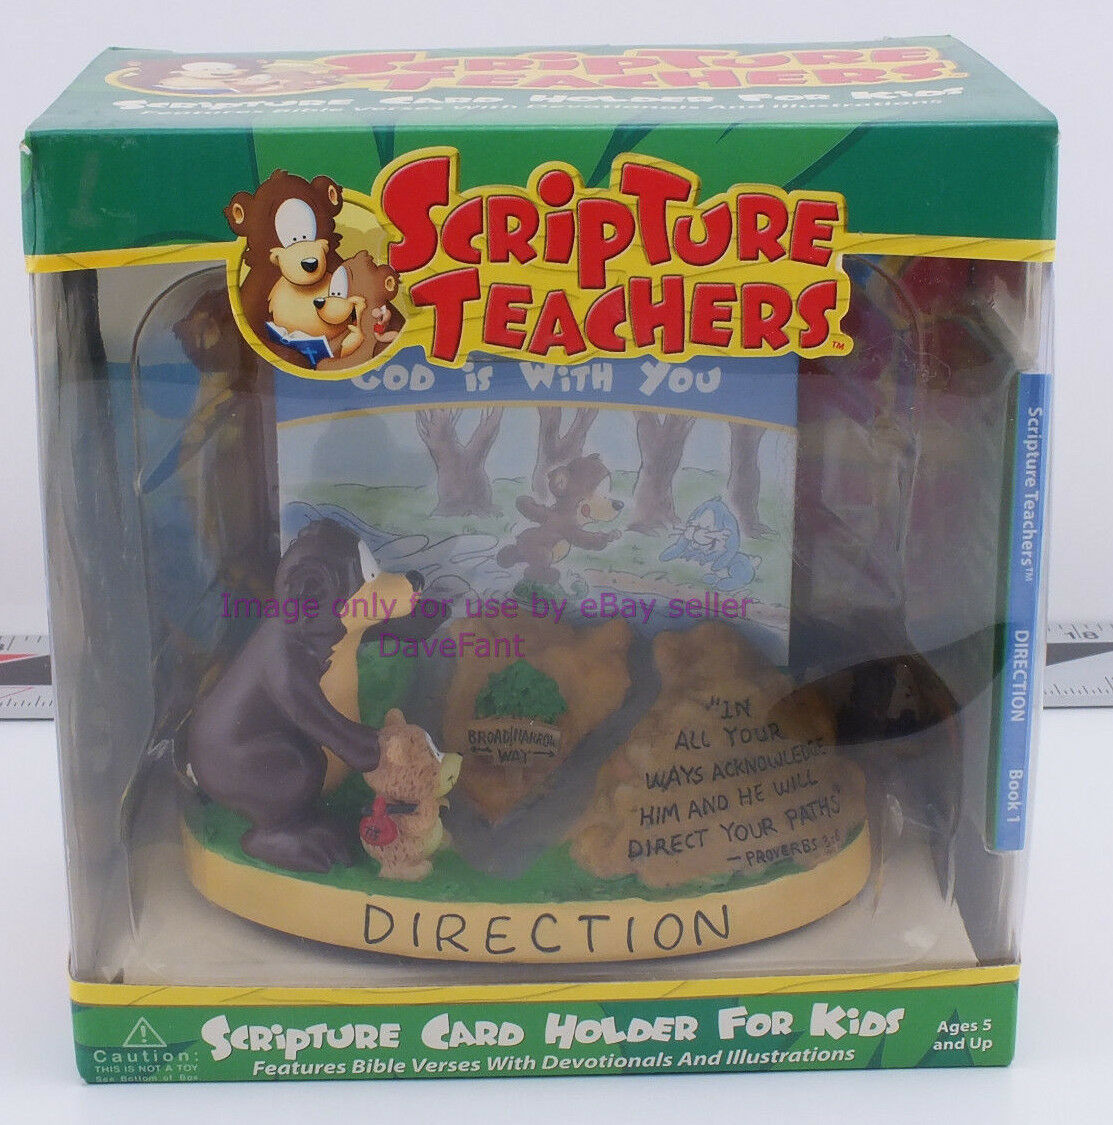 Scripture Teachers Direction Card Holder For Kids New In Box - Dave's Hobby Shop by W5SWL